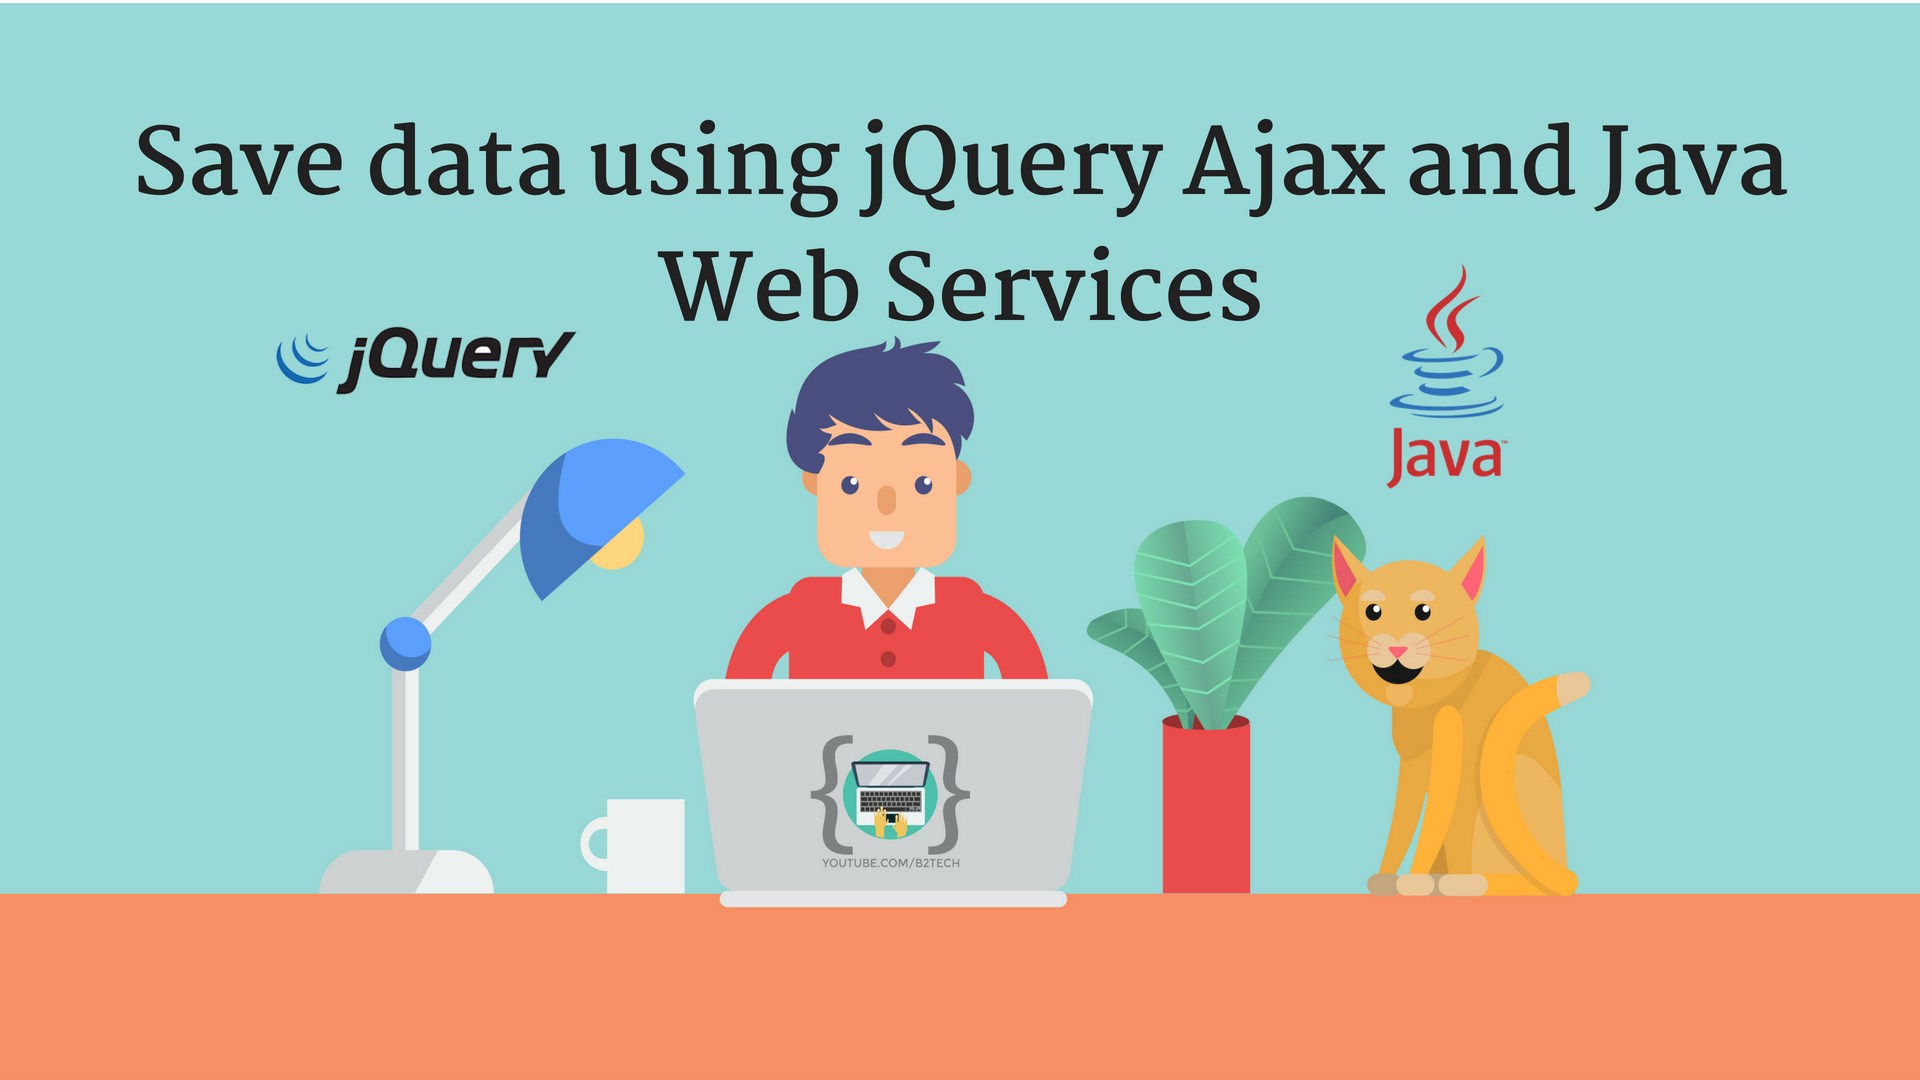 You are currently viewing Save data [POST] using Java Web Services and jQuery Ajax